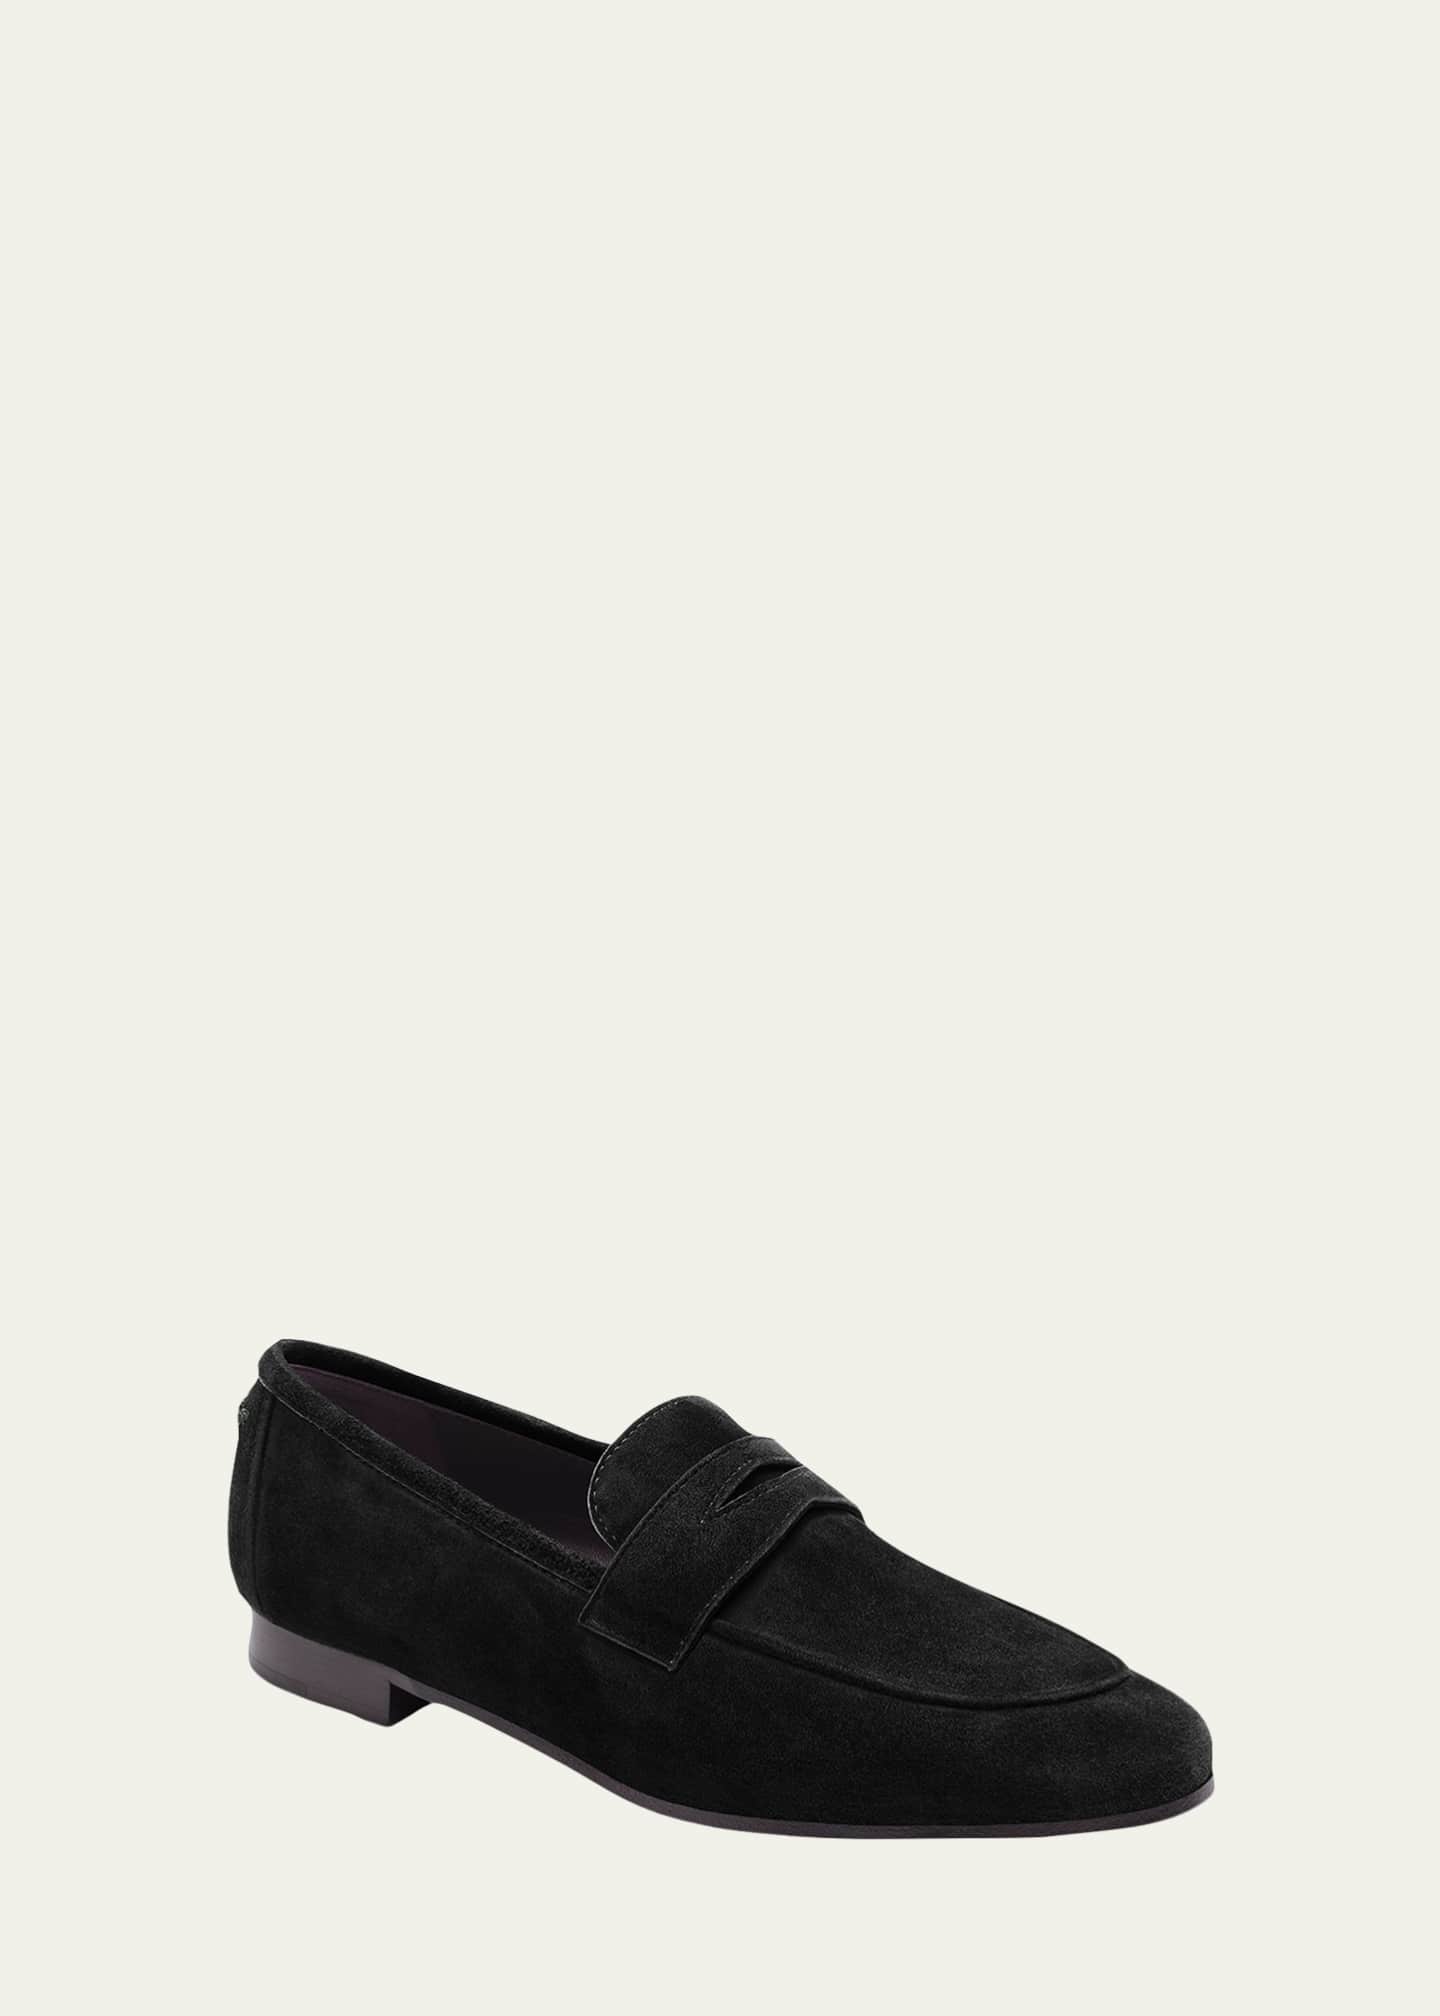 Bougeotte Suede Slip-On Penny Loafer - Bergdorf Goodman